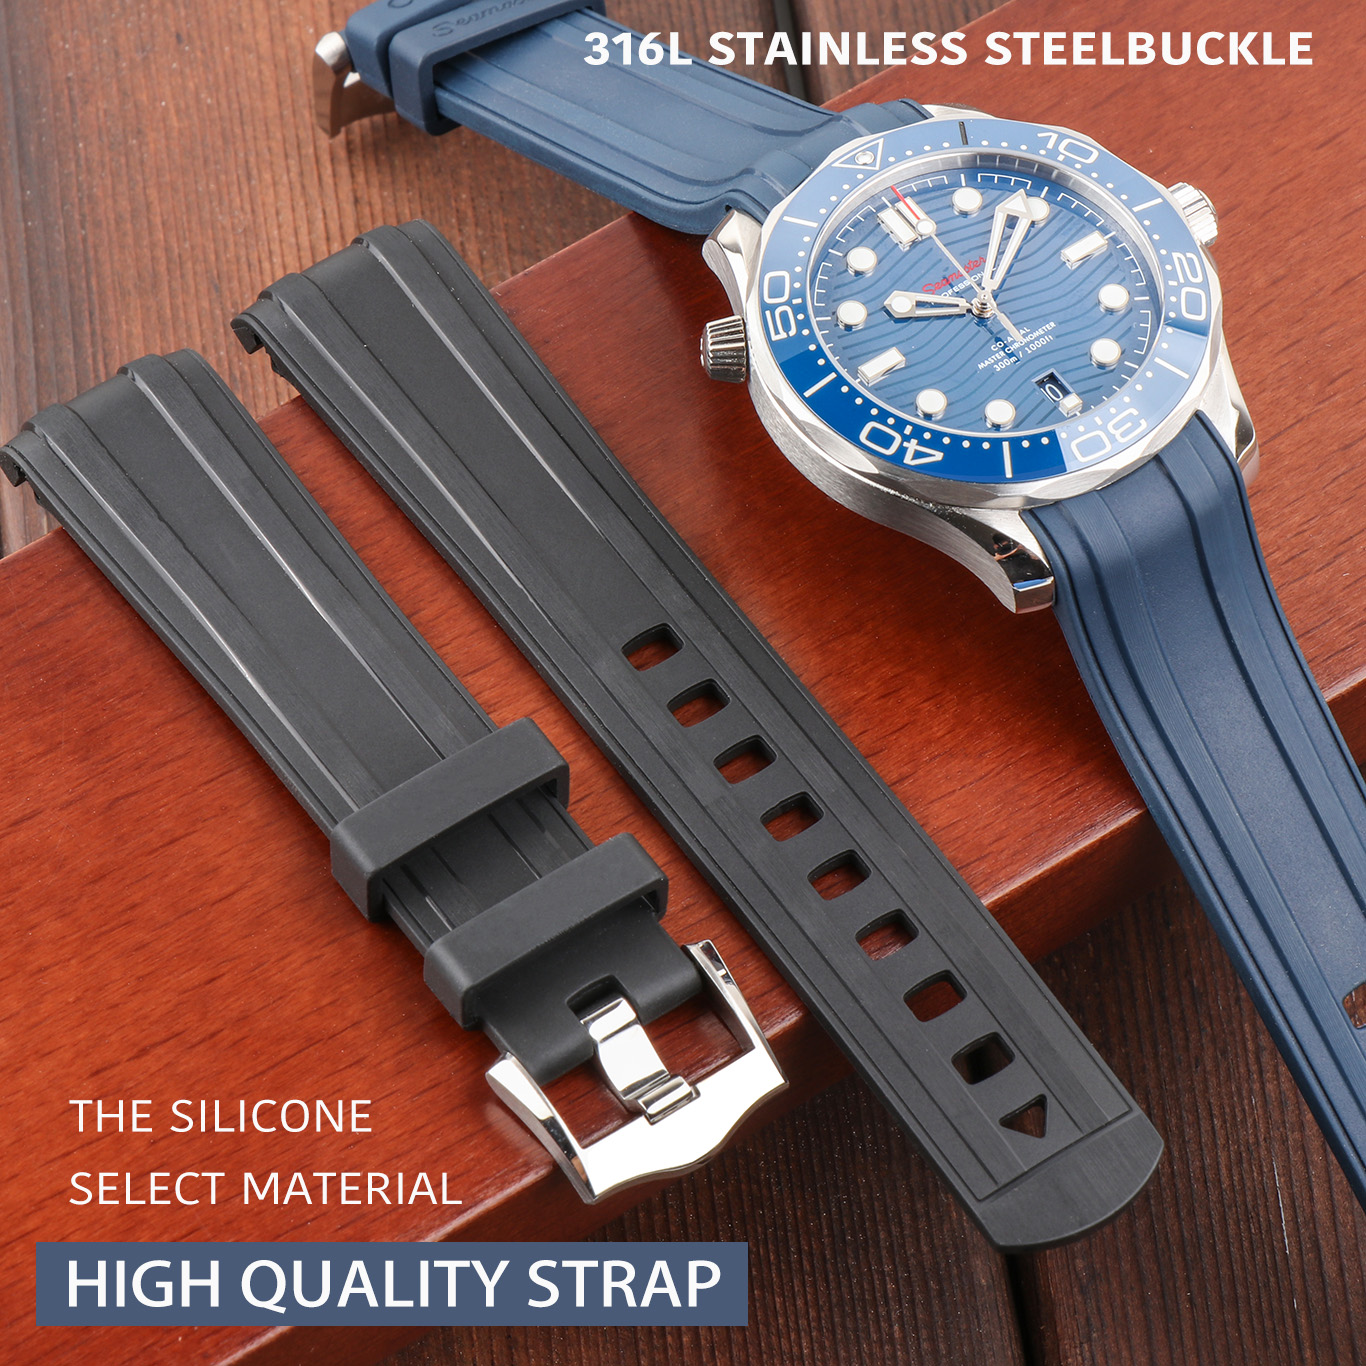 

Curved End 20mm Watch Strap Bands Man Blue Black Waterproof Silicone Rubber Watchbands Bracelet Clasp Buckle For Omega Sea Master 300m with Tools